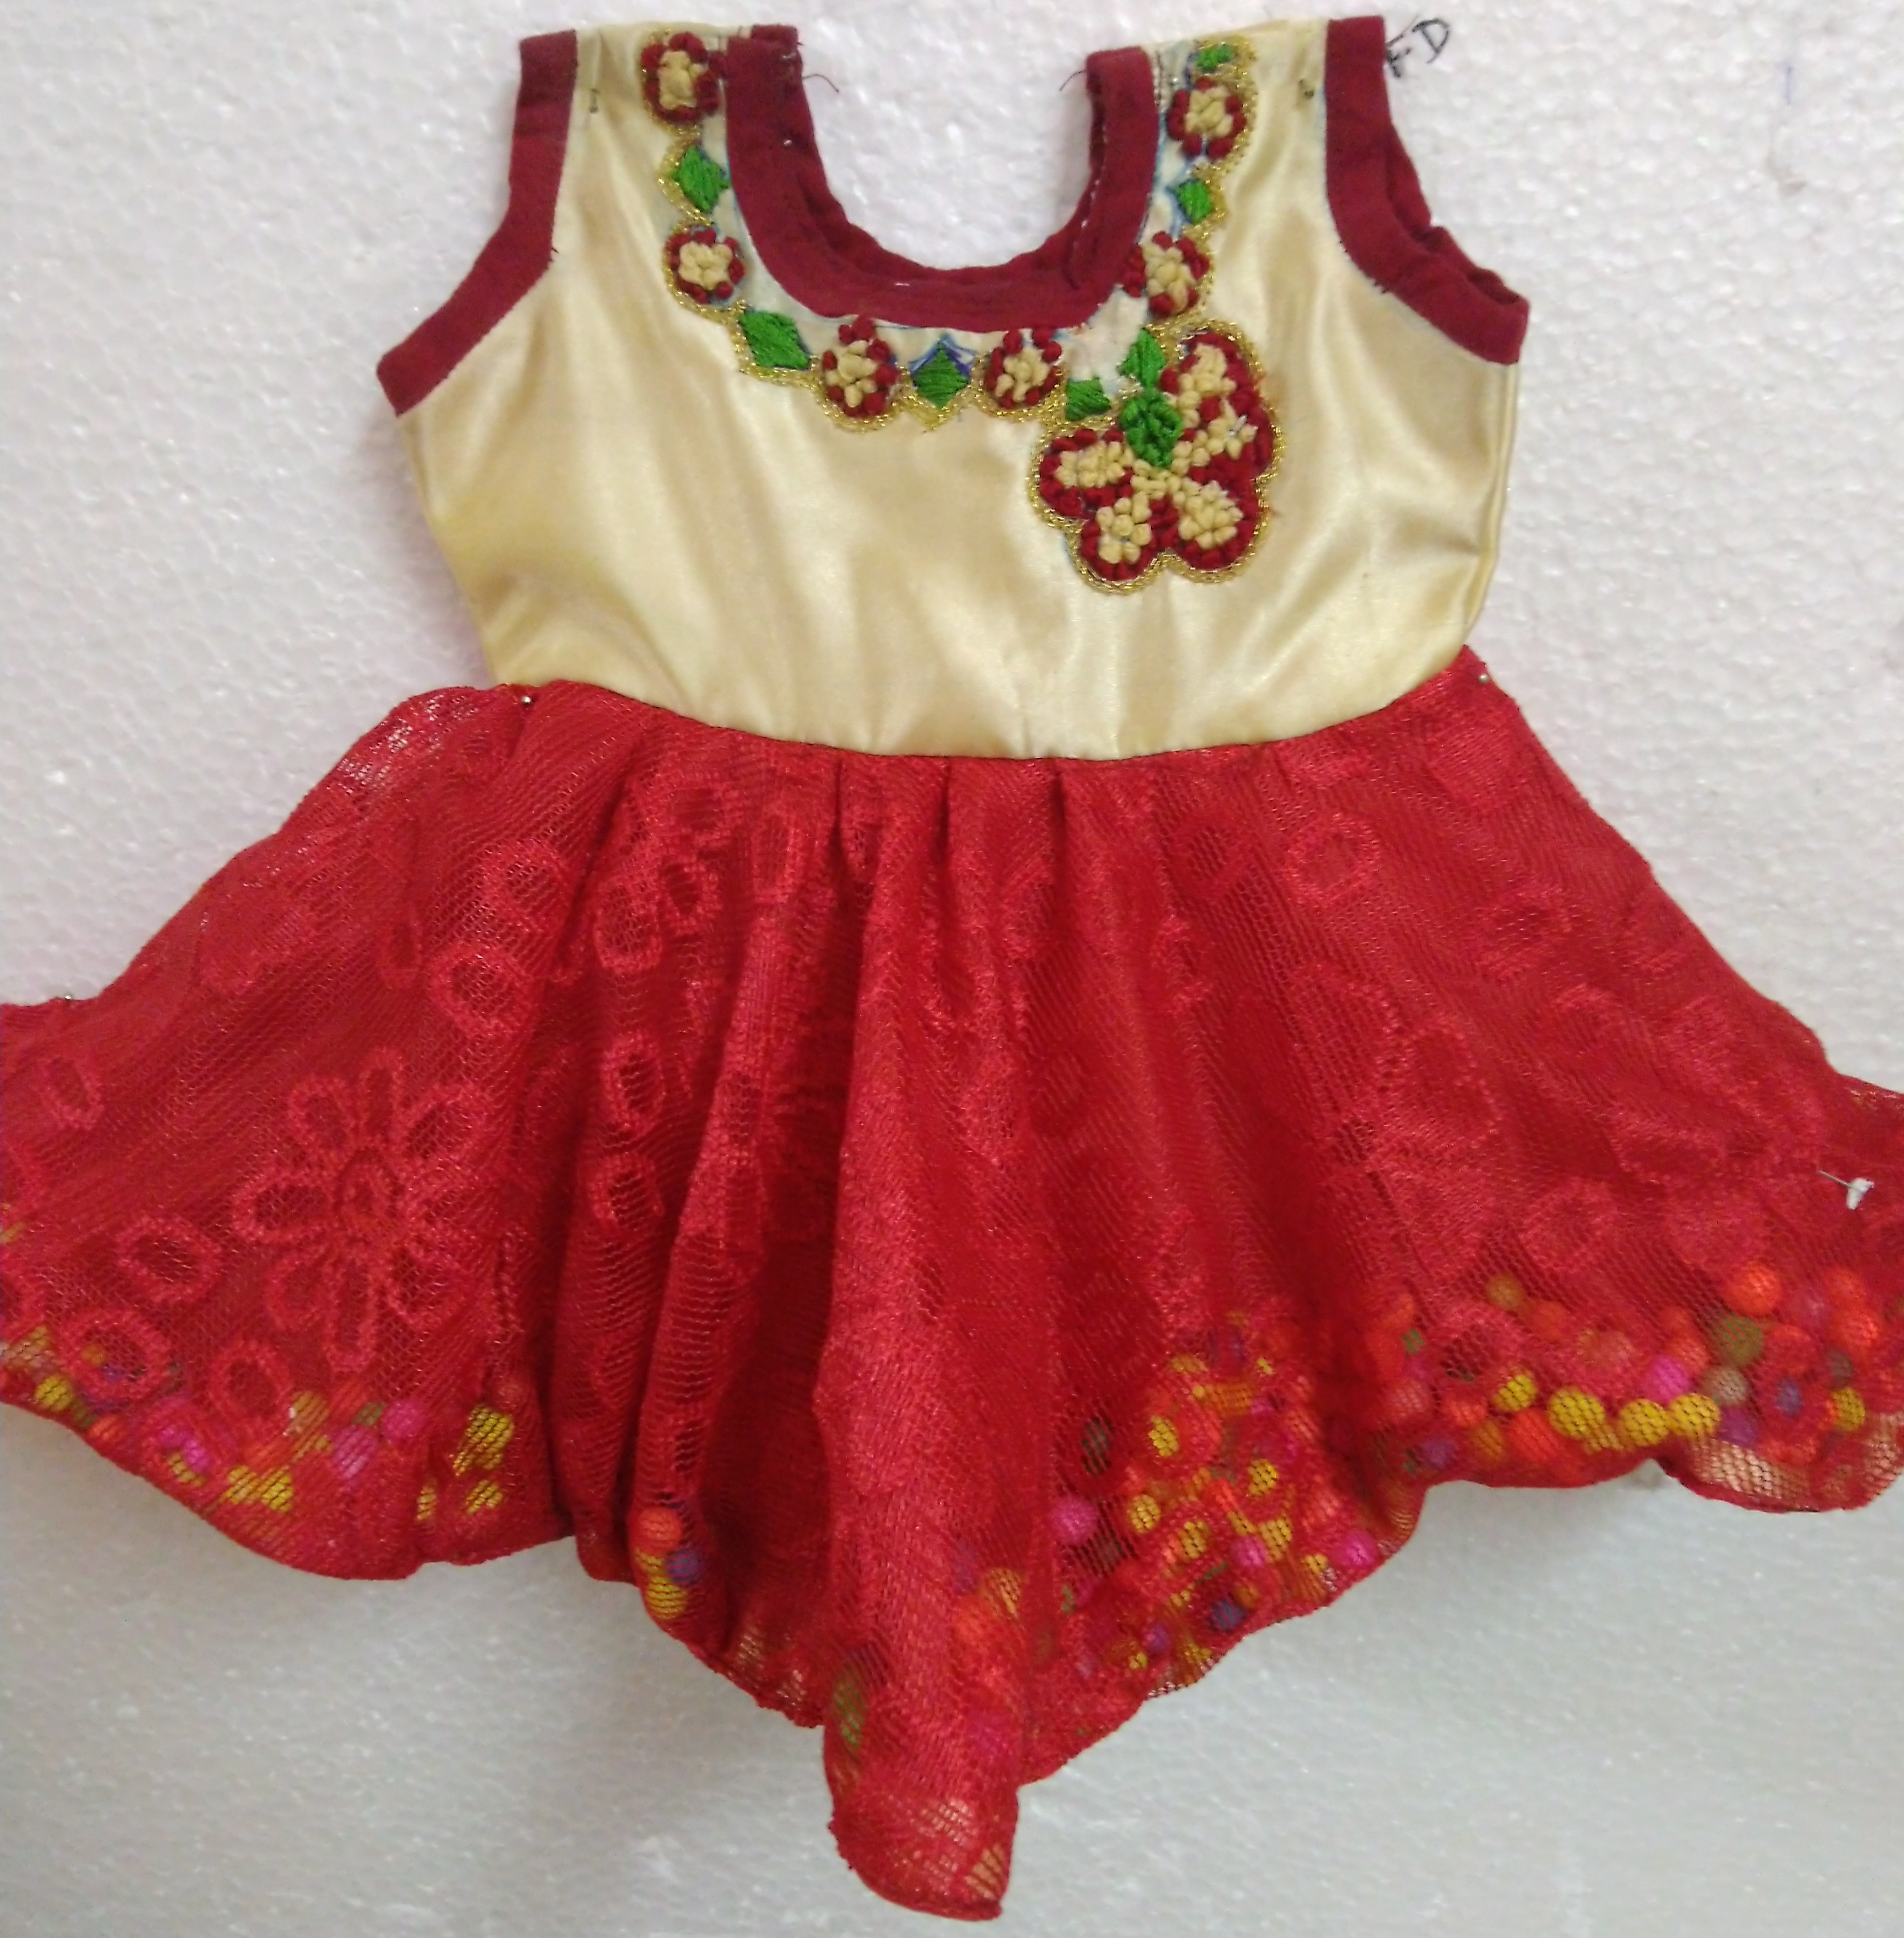 Learn to design and Stitch Balloon type frock | Contact Top Fashion School in India